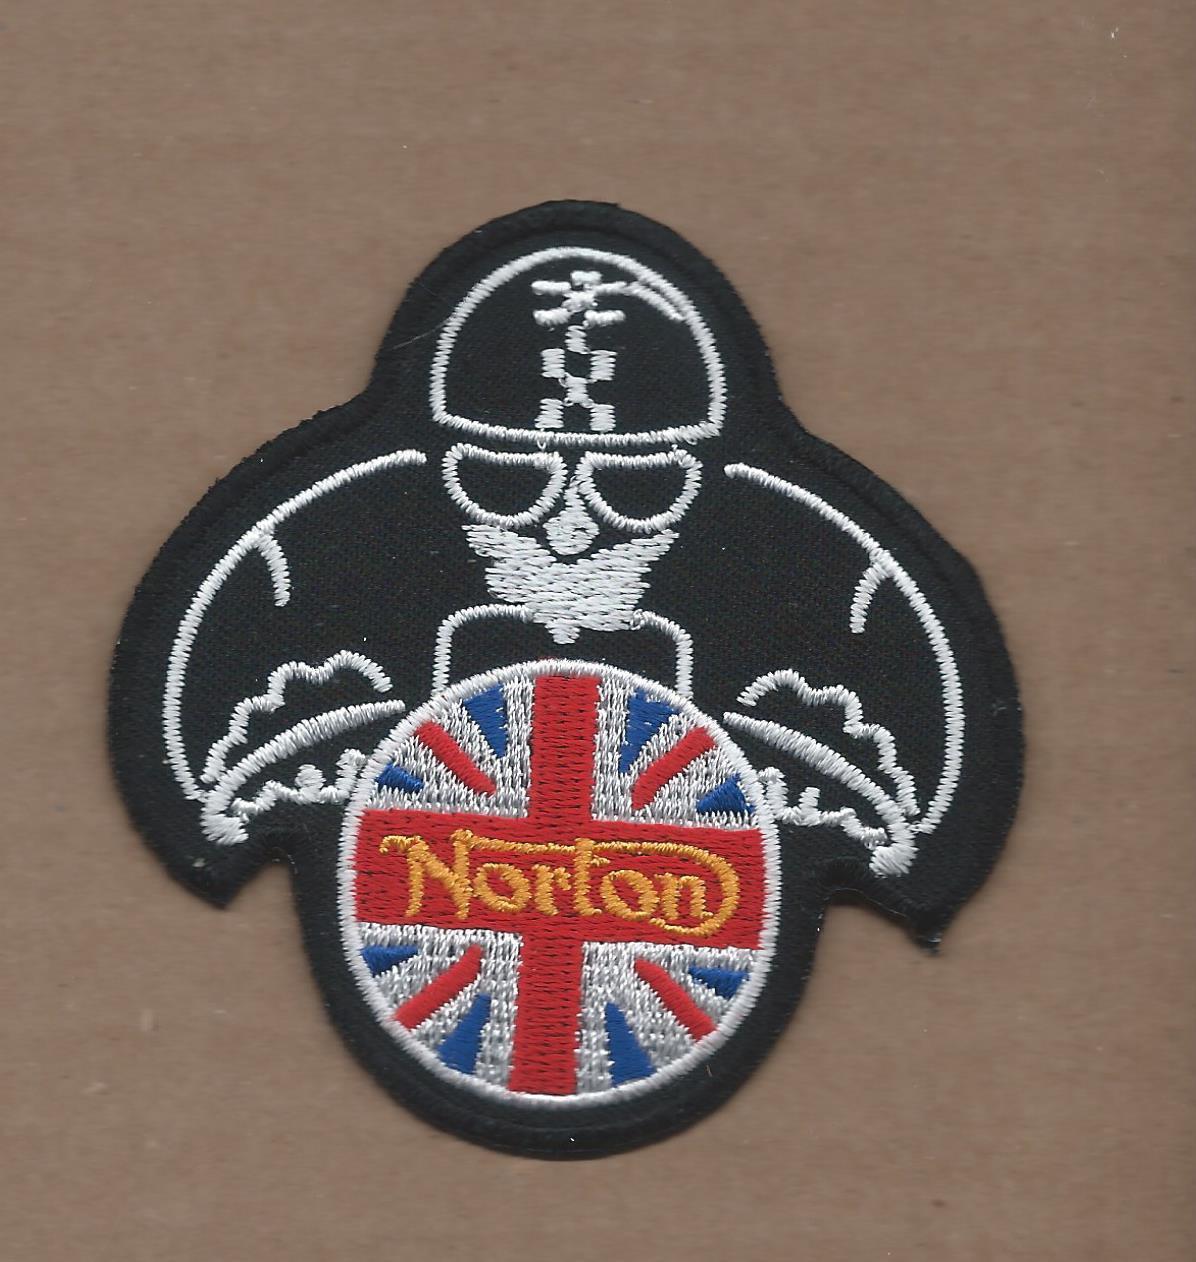 New 3 1/8 Inch Norton Iron On Patch Free Shipping